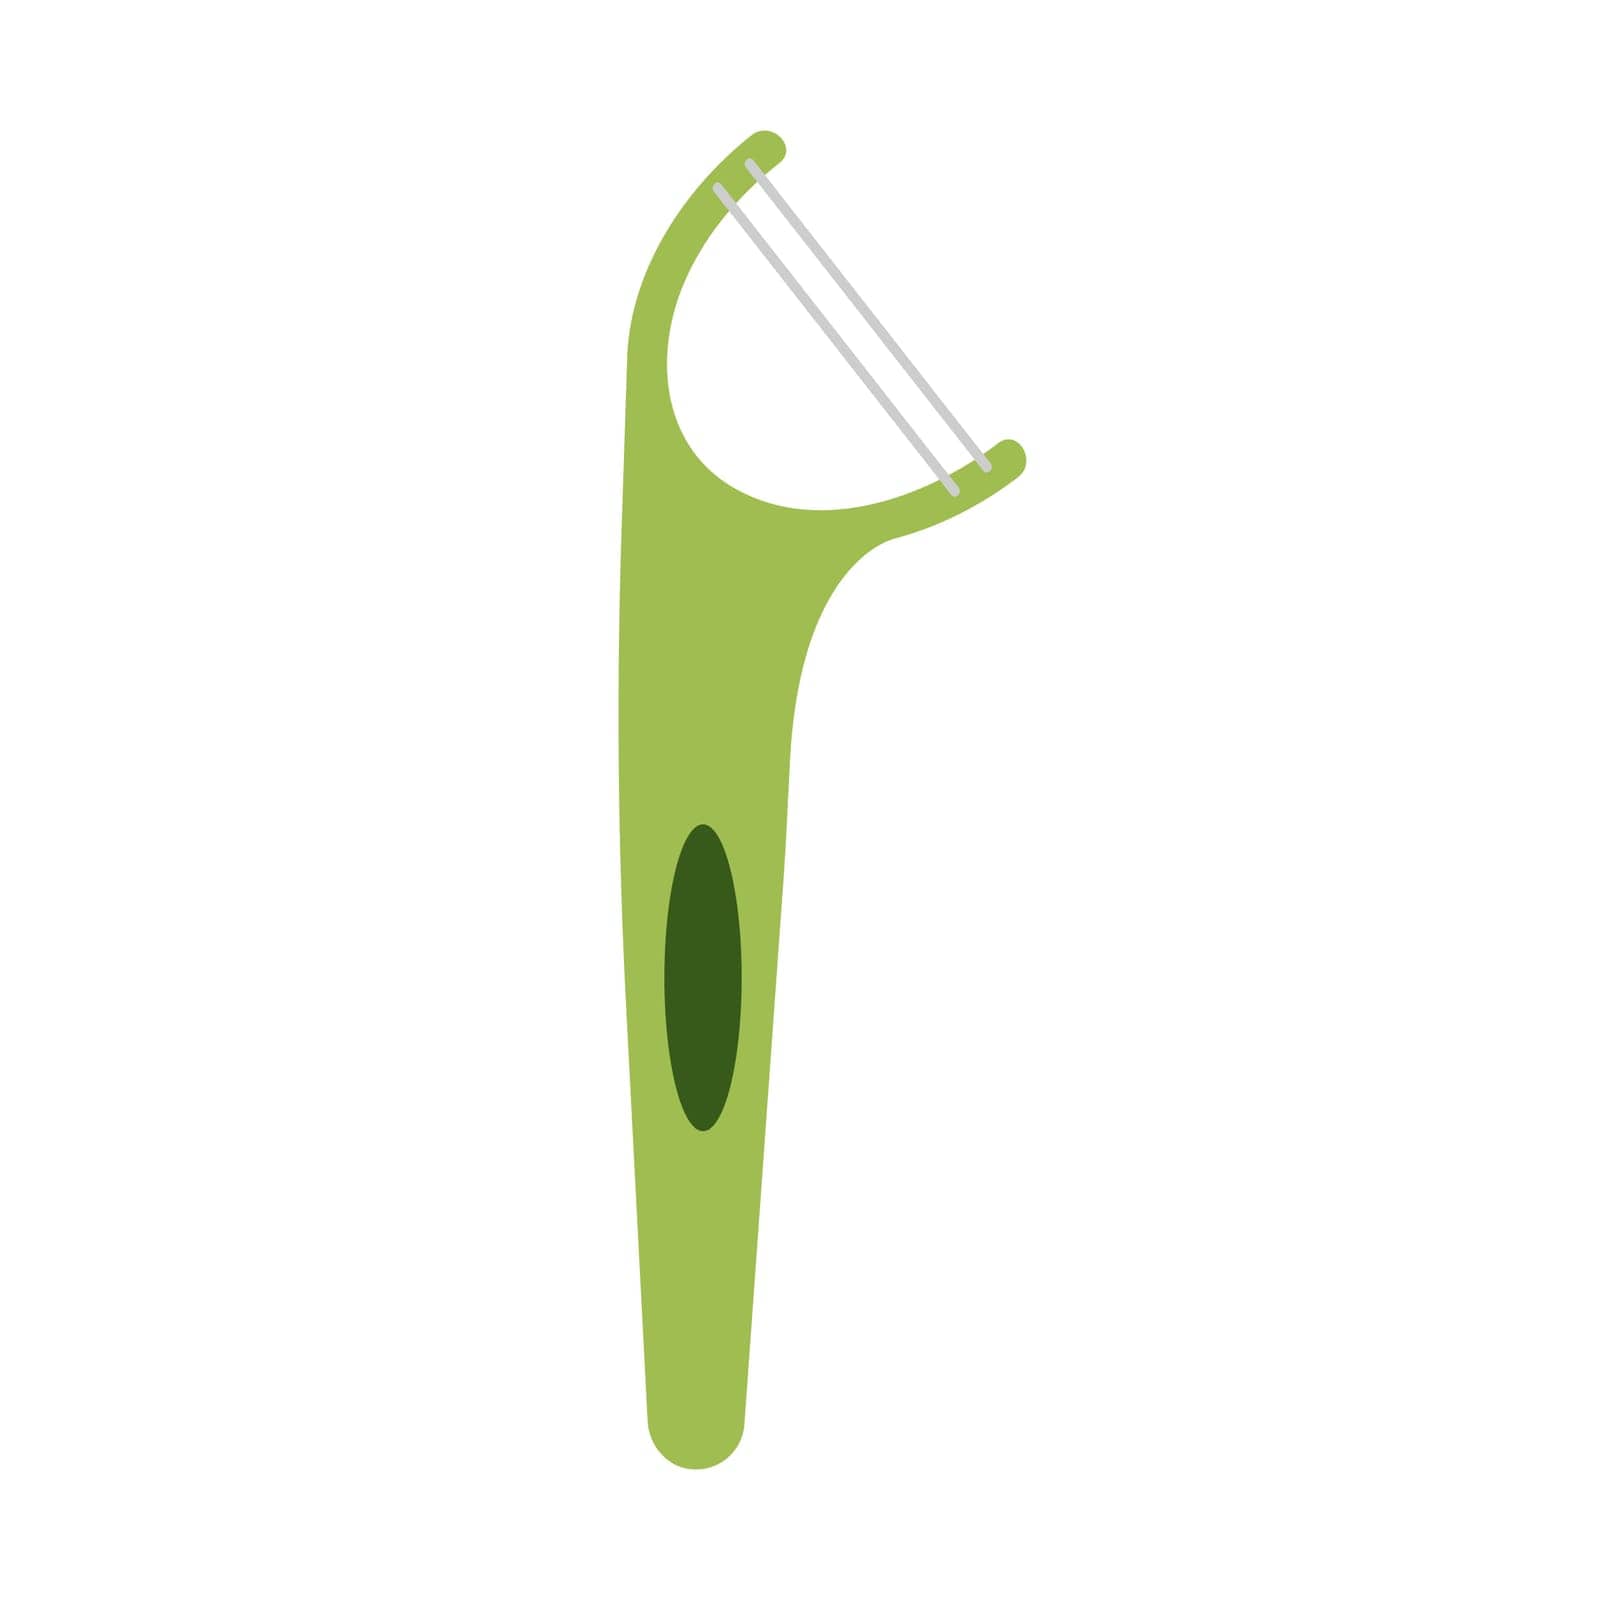 Dental floss with green plastic handle and string for oral hygiene vector illustration